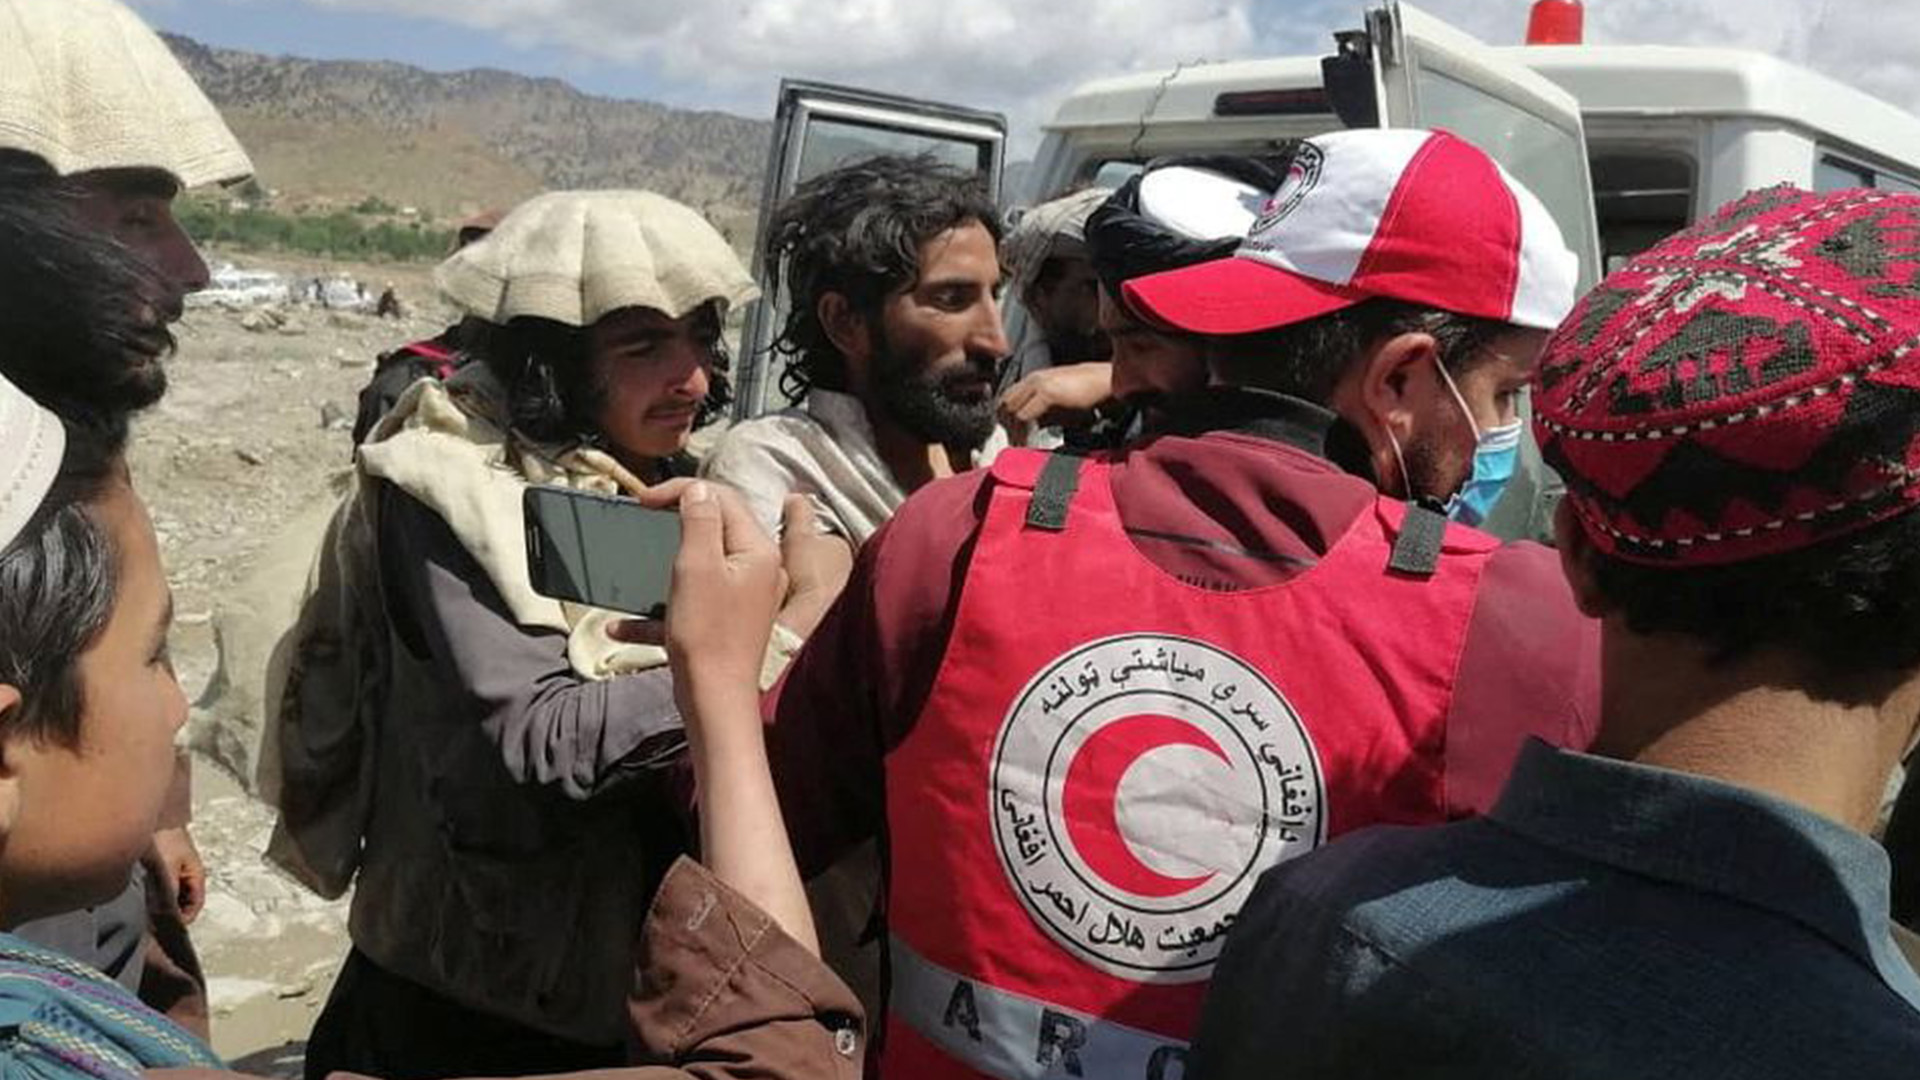  Afghan Red Crescent medics and volunteers transport earthquake victims to hospitals in Spera district, Khost province, Afghanistan. Afghan Red Crescent Society/Handout via REUTERS